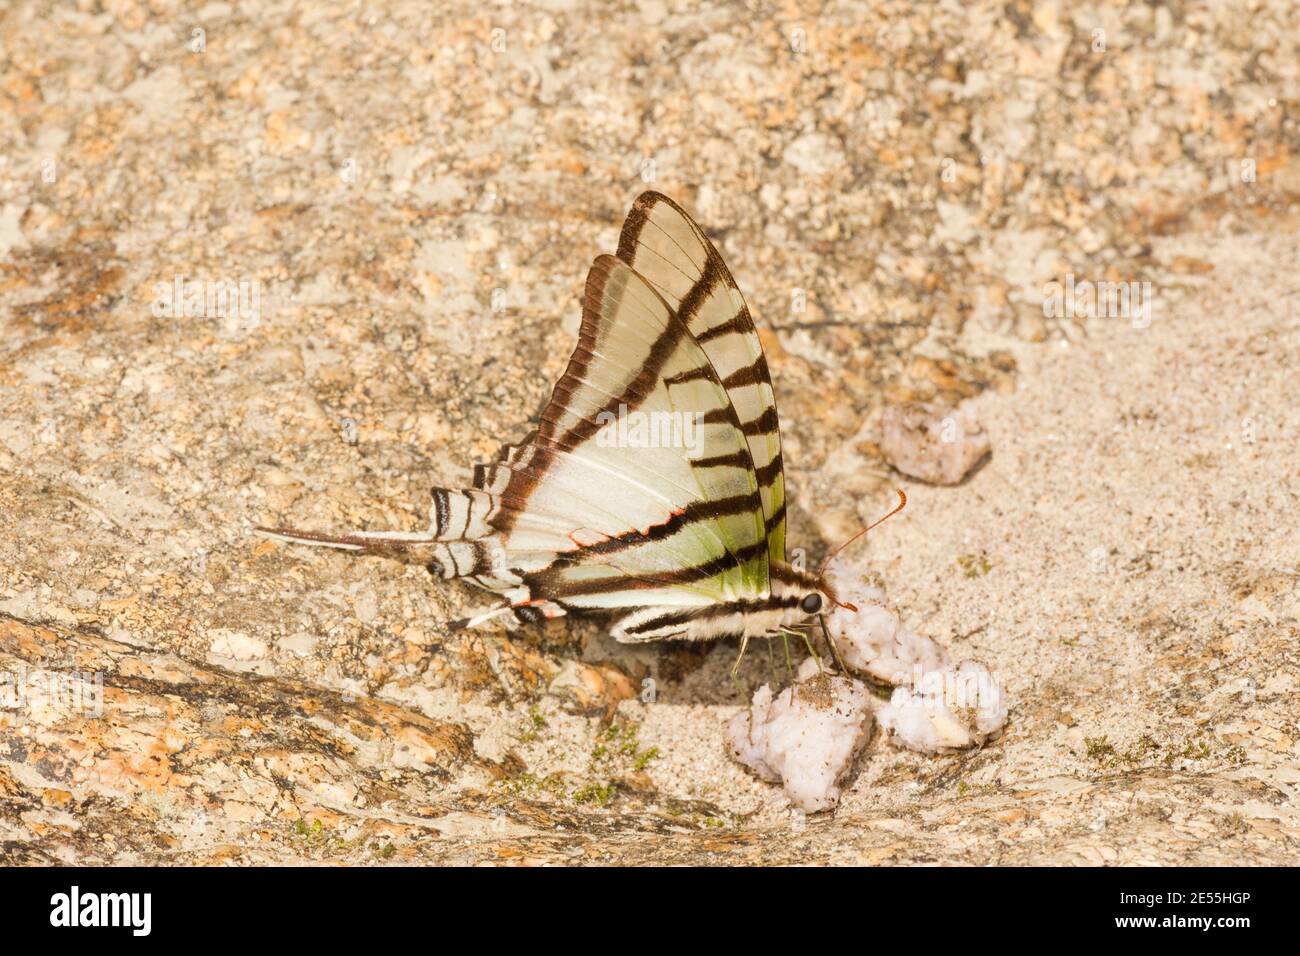 Yellow-spotted Kite-Swallowtail Butterfly, Eurytides telesilaus, Papilionidae. Stock Photo